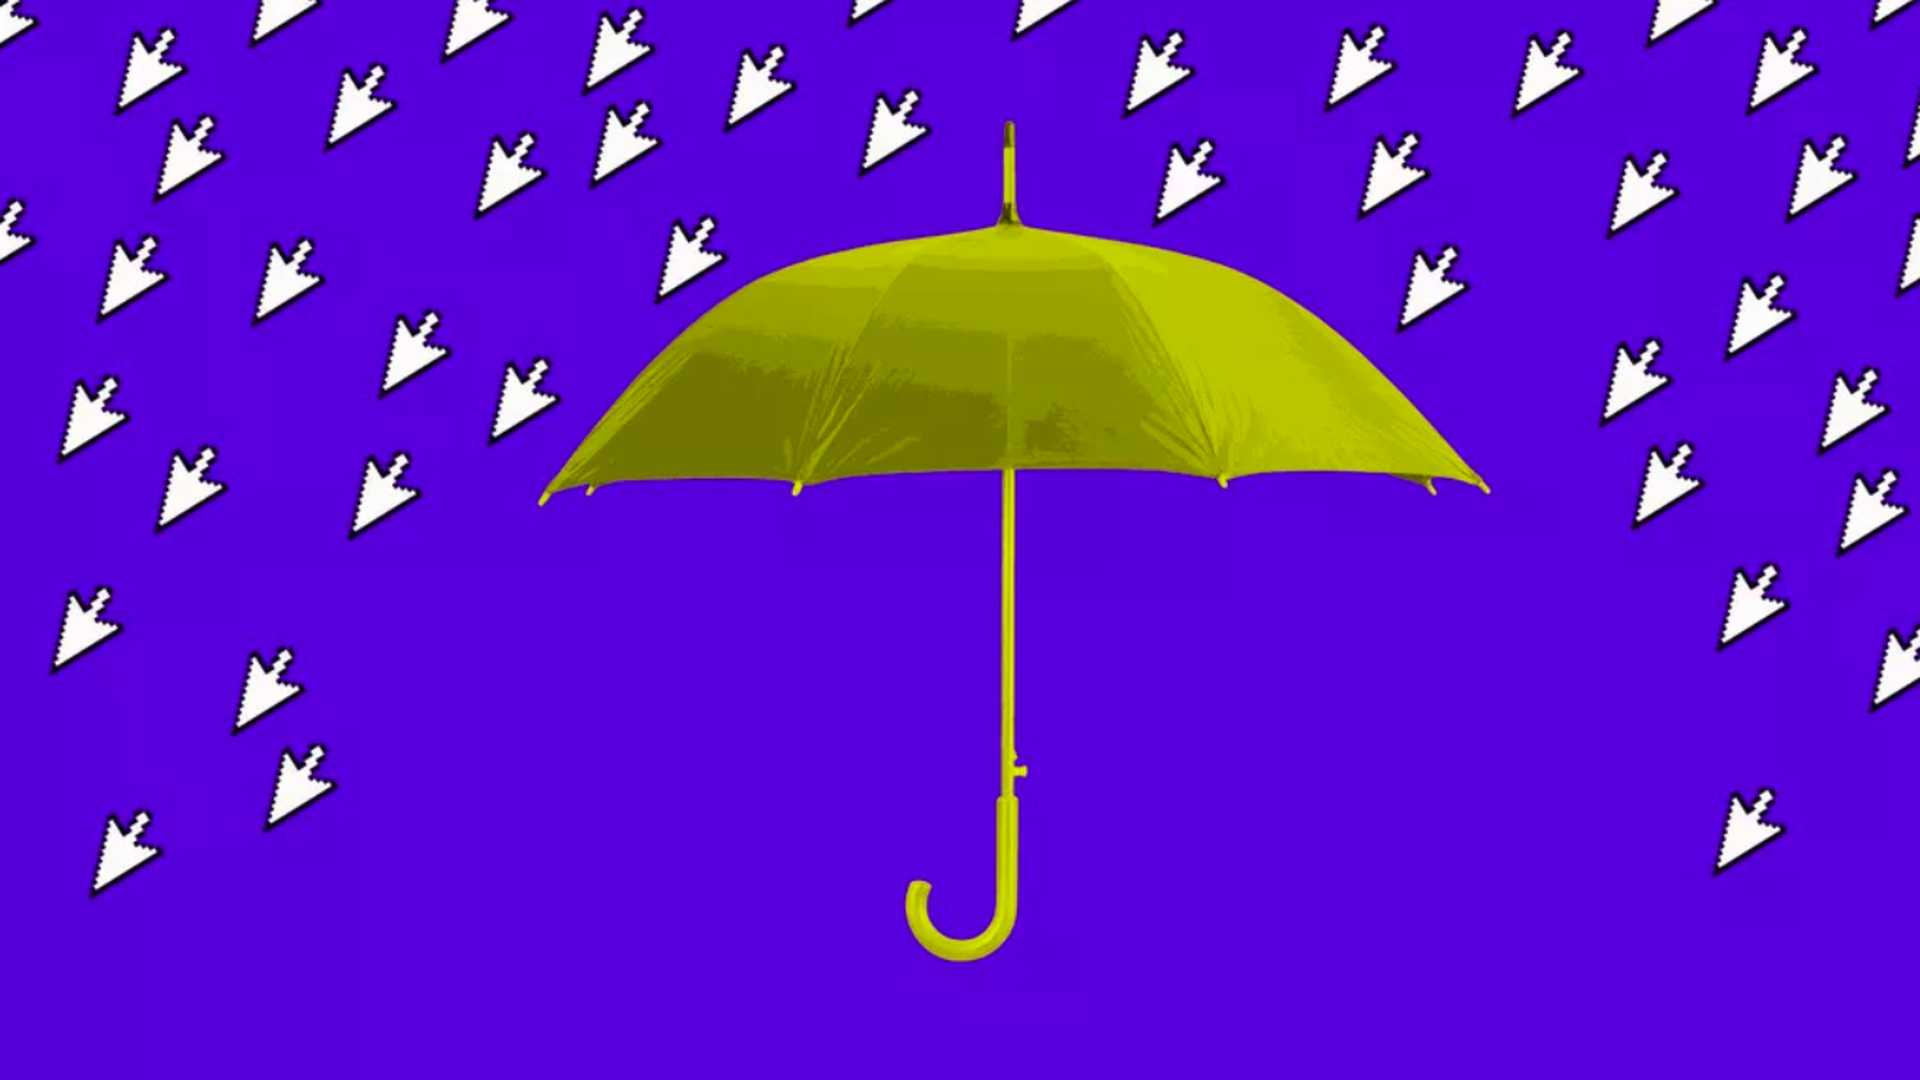 In this illustration, a yellow umbrella shields a rain made of pixelated mouses.